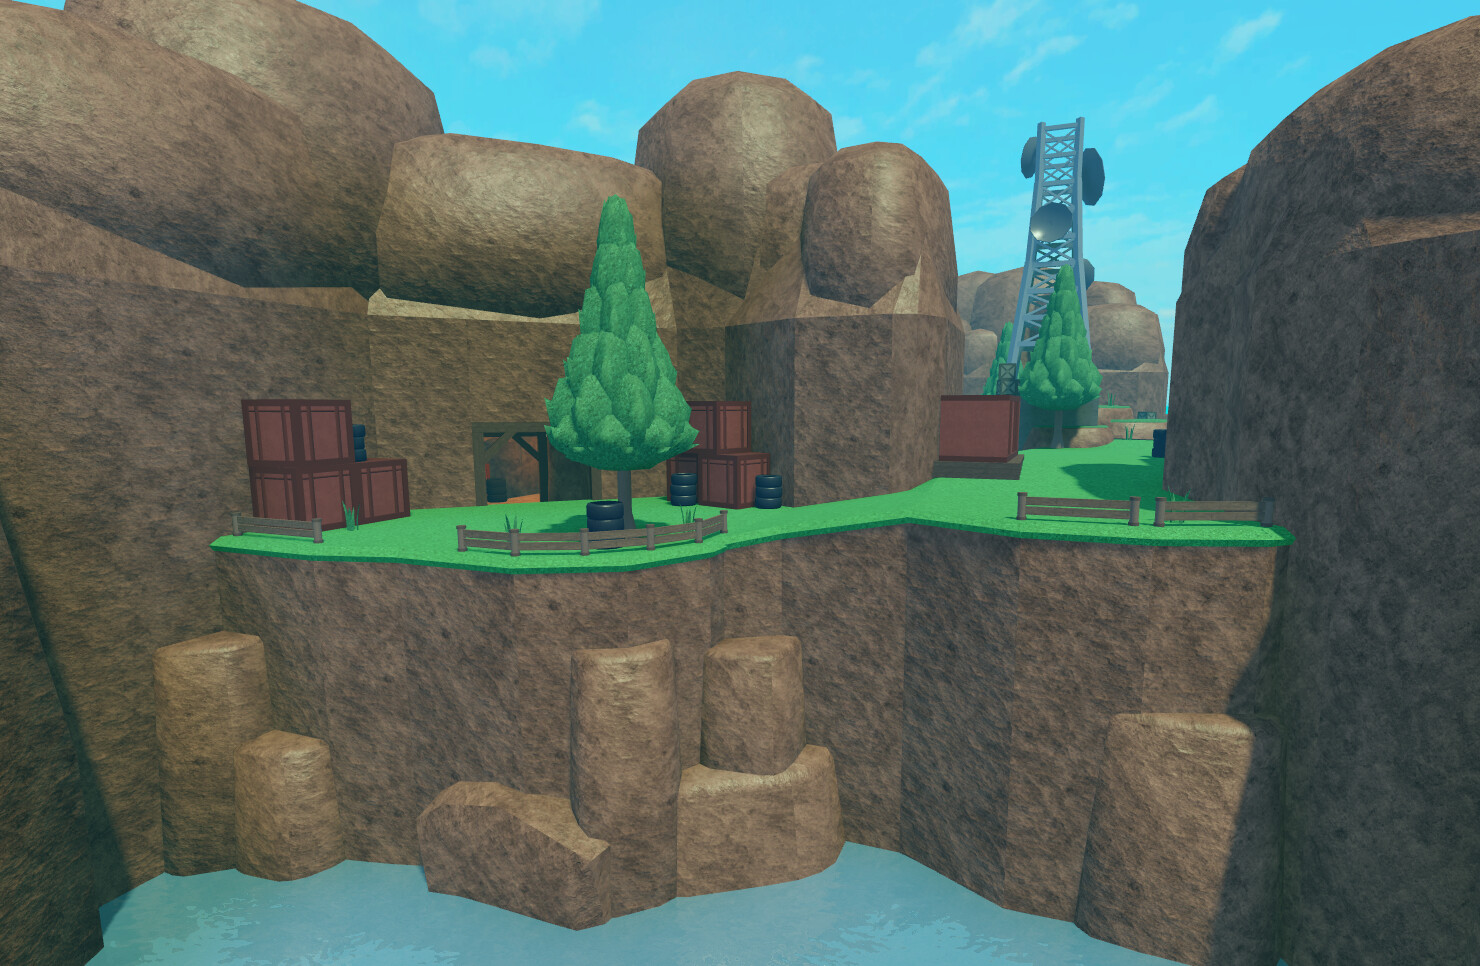 Roblox on X: #RobloxDev Update: We're pleased to announce that